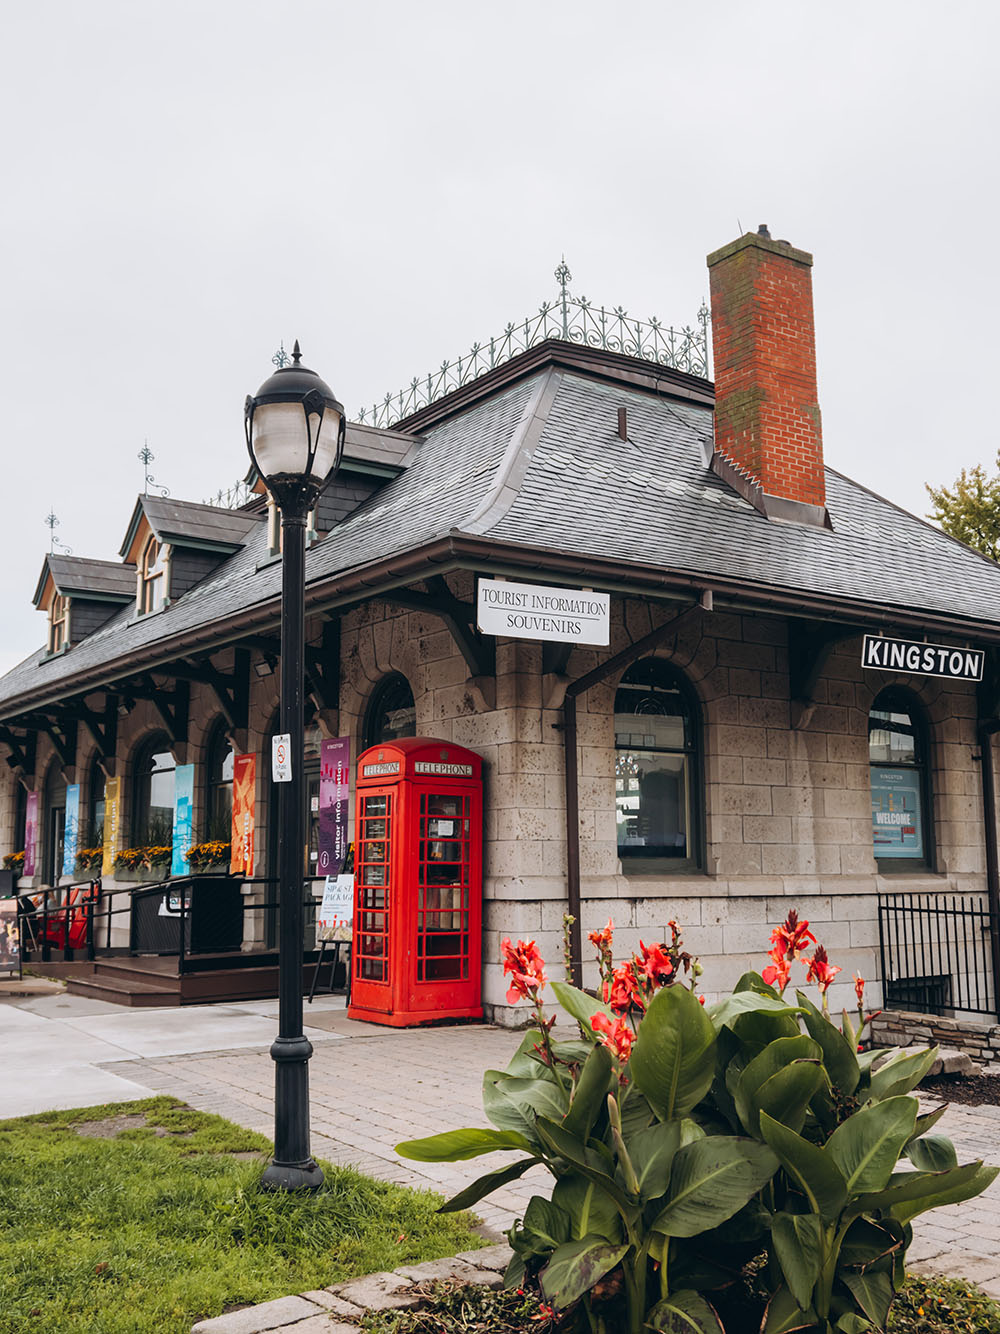 Planning a trip to Kingston, Ontario soon? This guide to the best things to do in Kingston is for you! From the top Kingston activities and attractions, to the must see sights, best restaurants, bars, and everything in between. You won’t want to miss this guide that will help you plan your perfect Kingston getaway. Pictured here: The Kingston Visitor's Information Centre